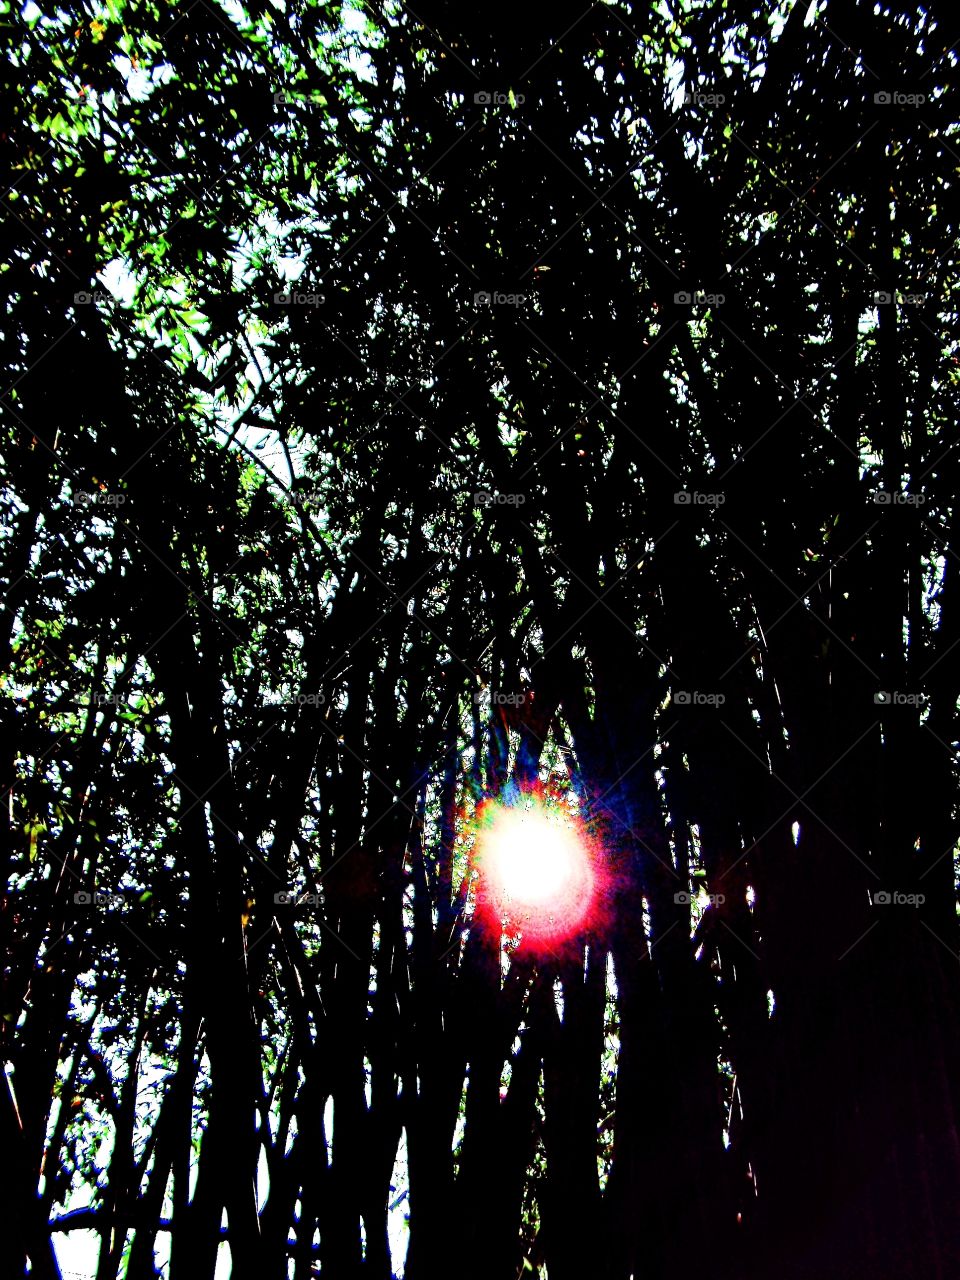 The sun and the bamboo trees.